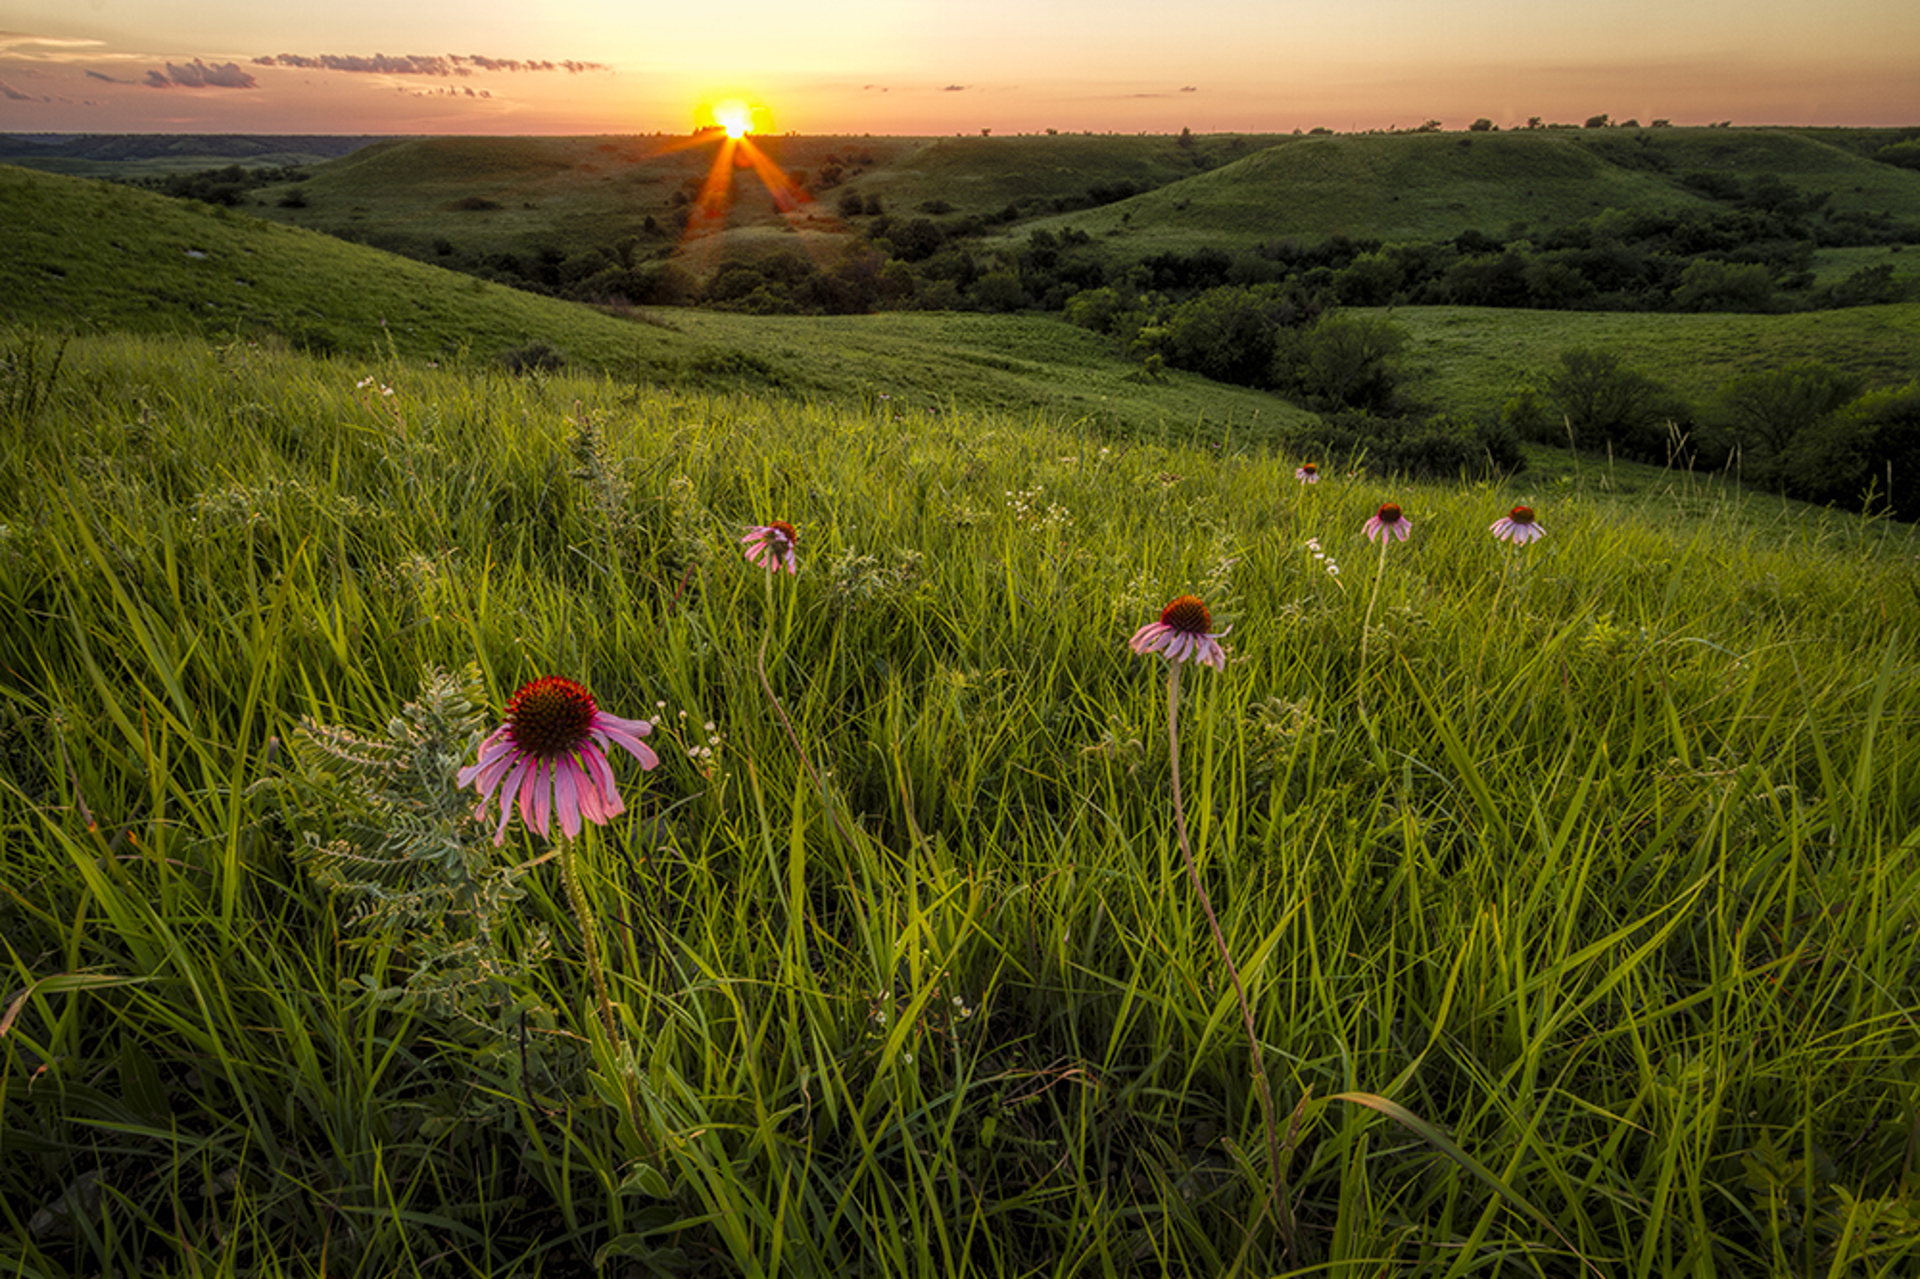 Out in the Flint Hills by Scott Bean